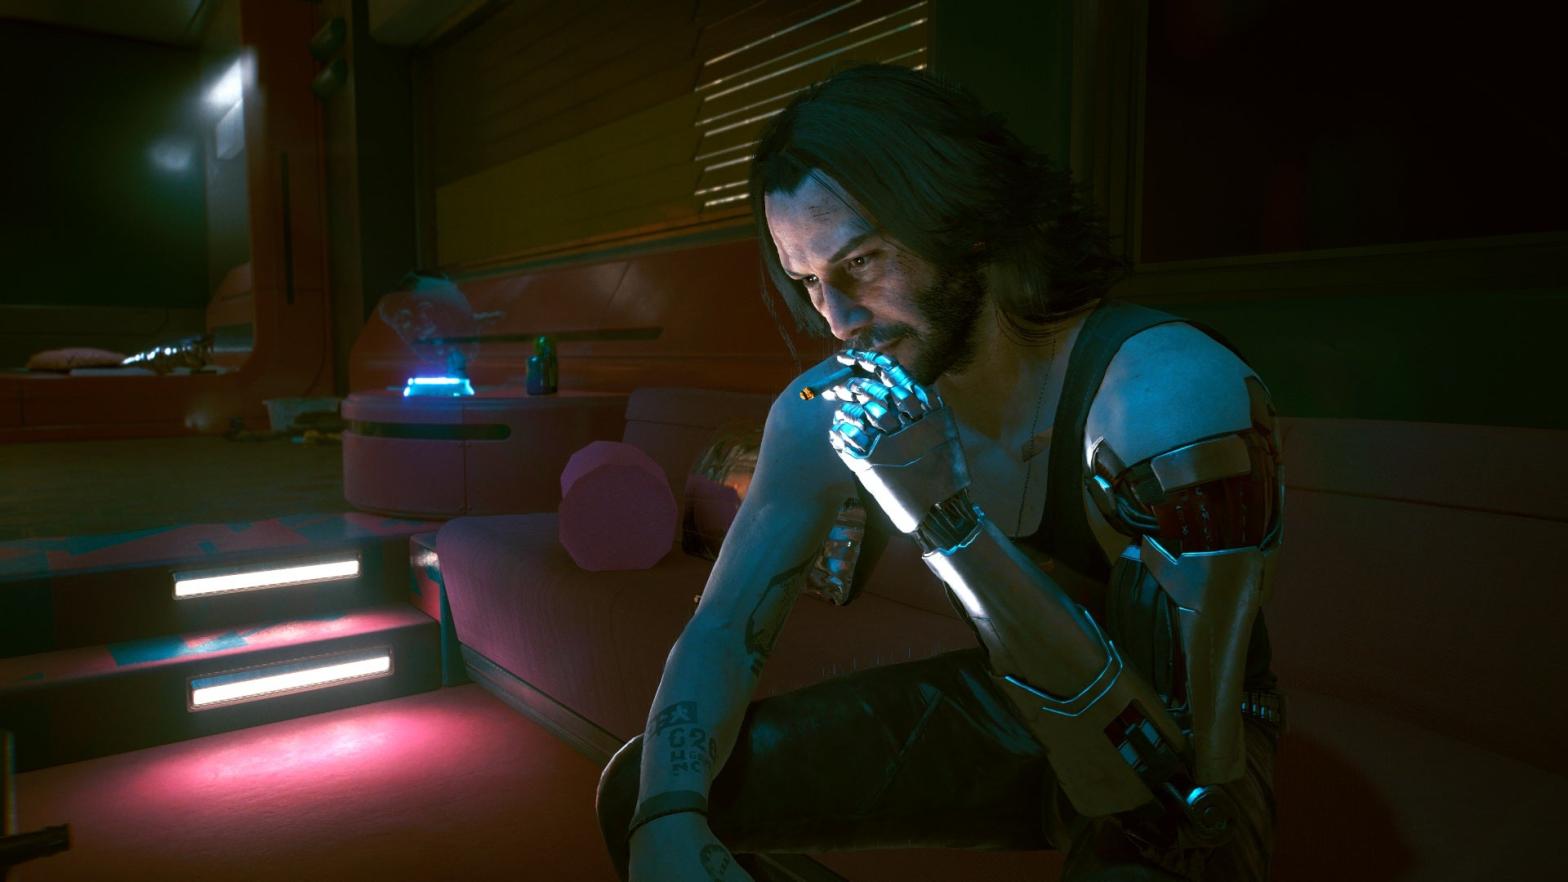 Devs Want Cyberpunk 2 To Capture The Worst Of America